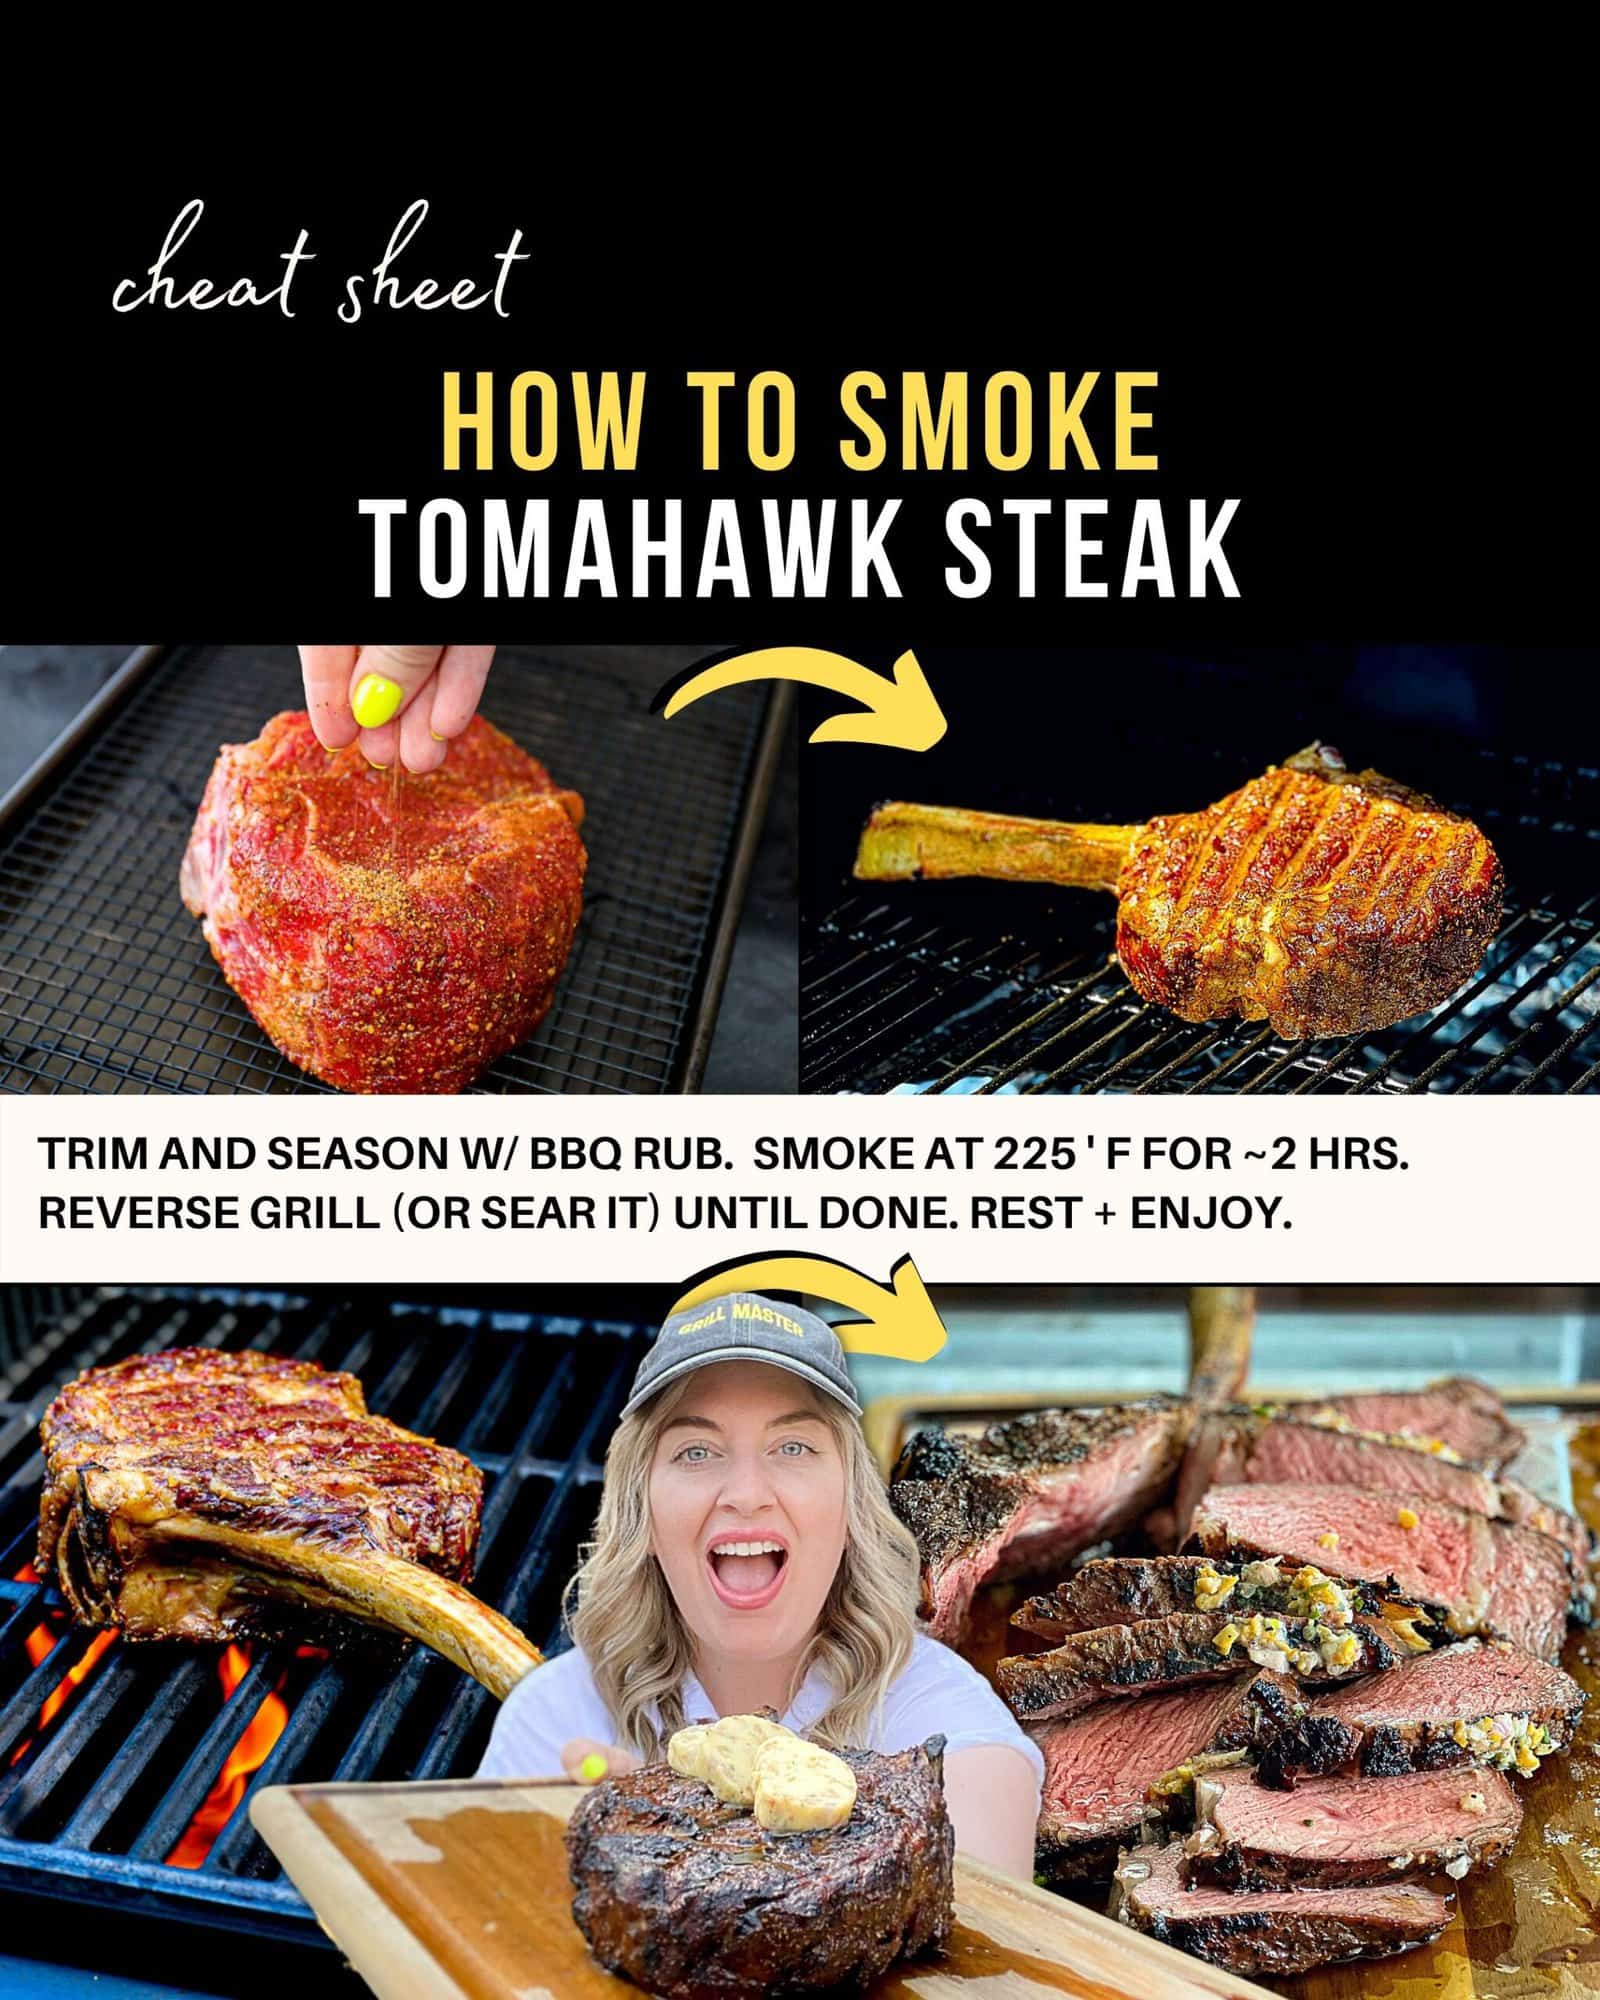 Infographic with steps and captions describing how to smoke tomahawk steak on a Traeger pellet grill with food blogger Jenna Passaro